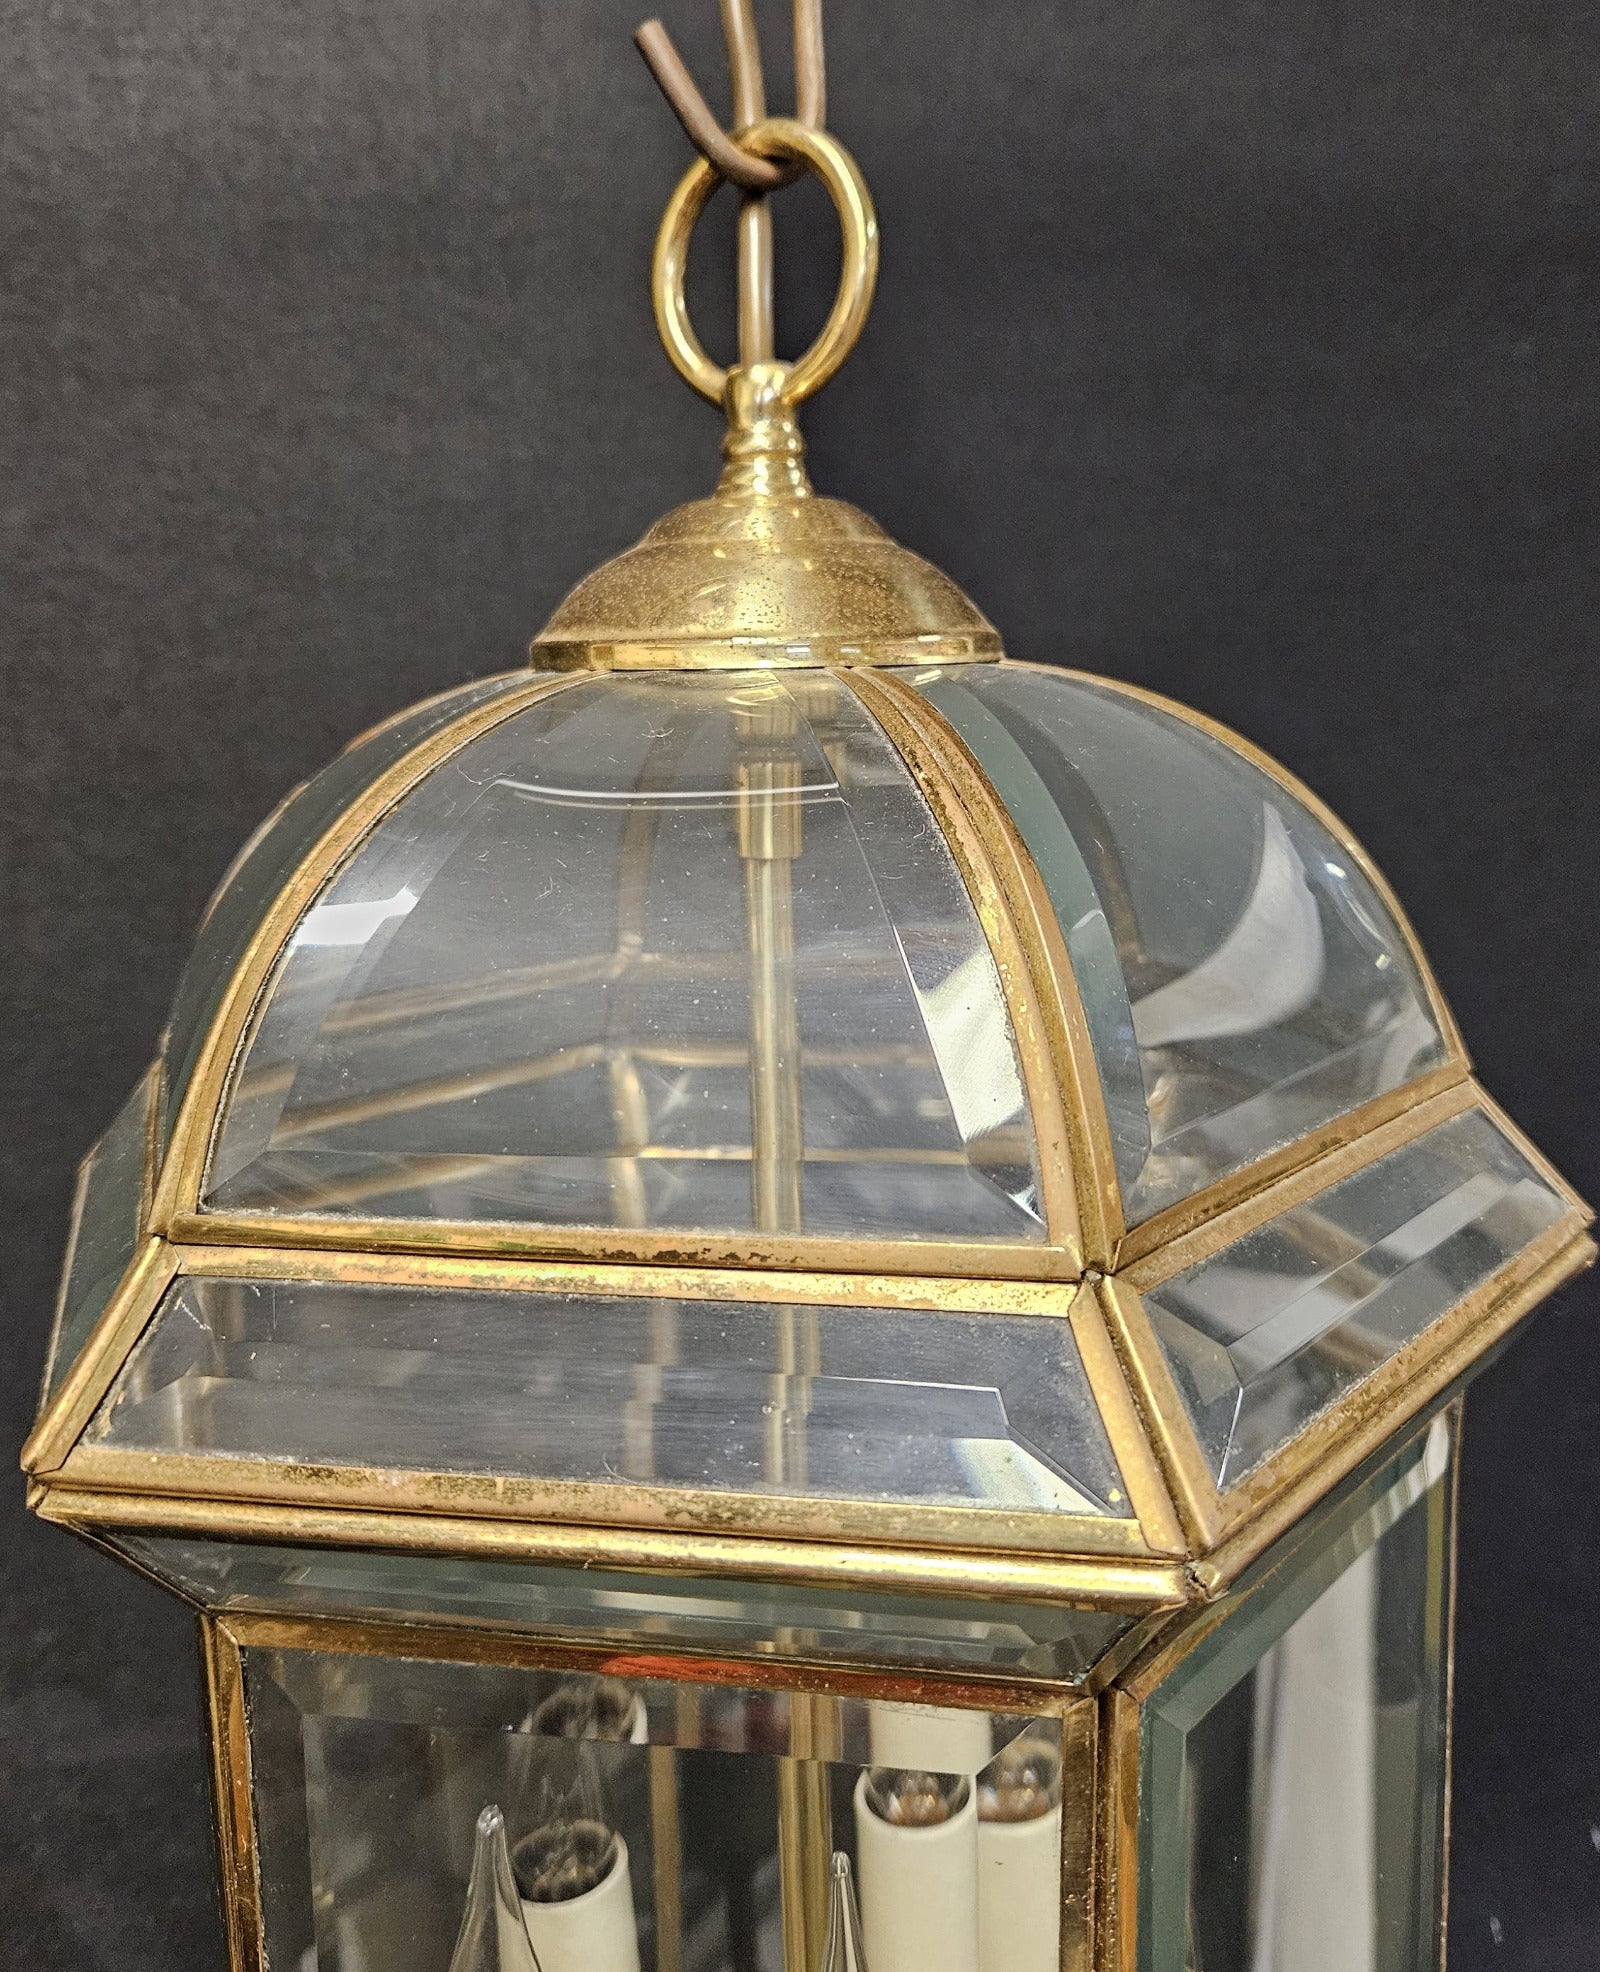 top view of curved glass dome